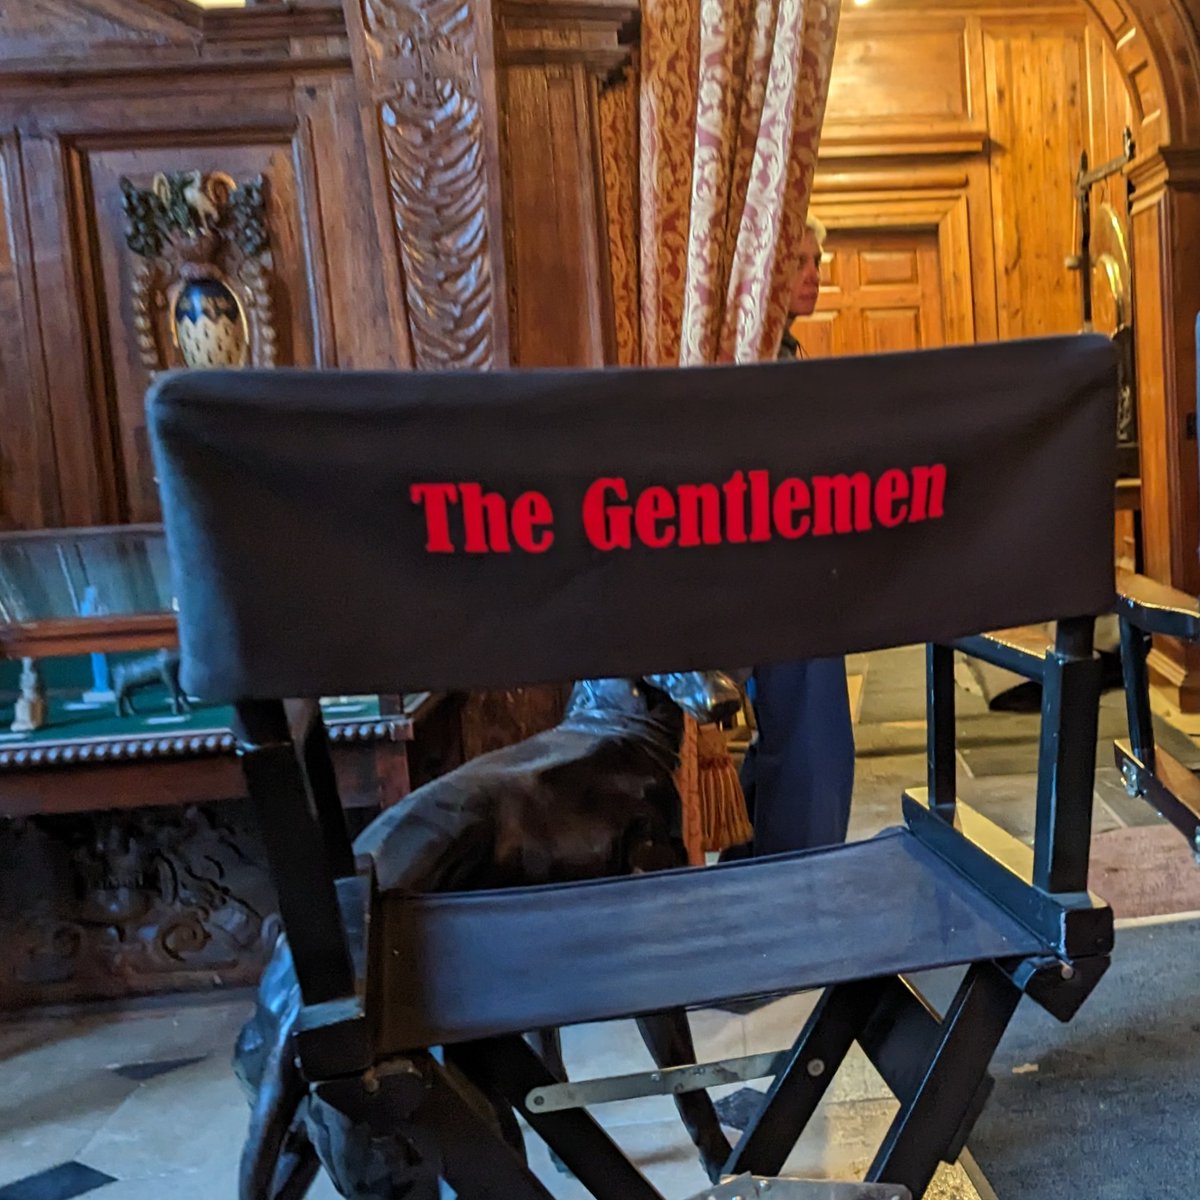 Watch episode 4 of 'The Gentlemen' on Netflix to catch us in our starring role! 🏰 @netflix